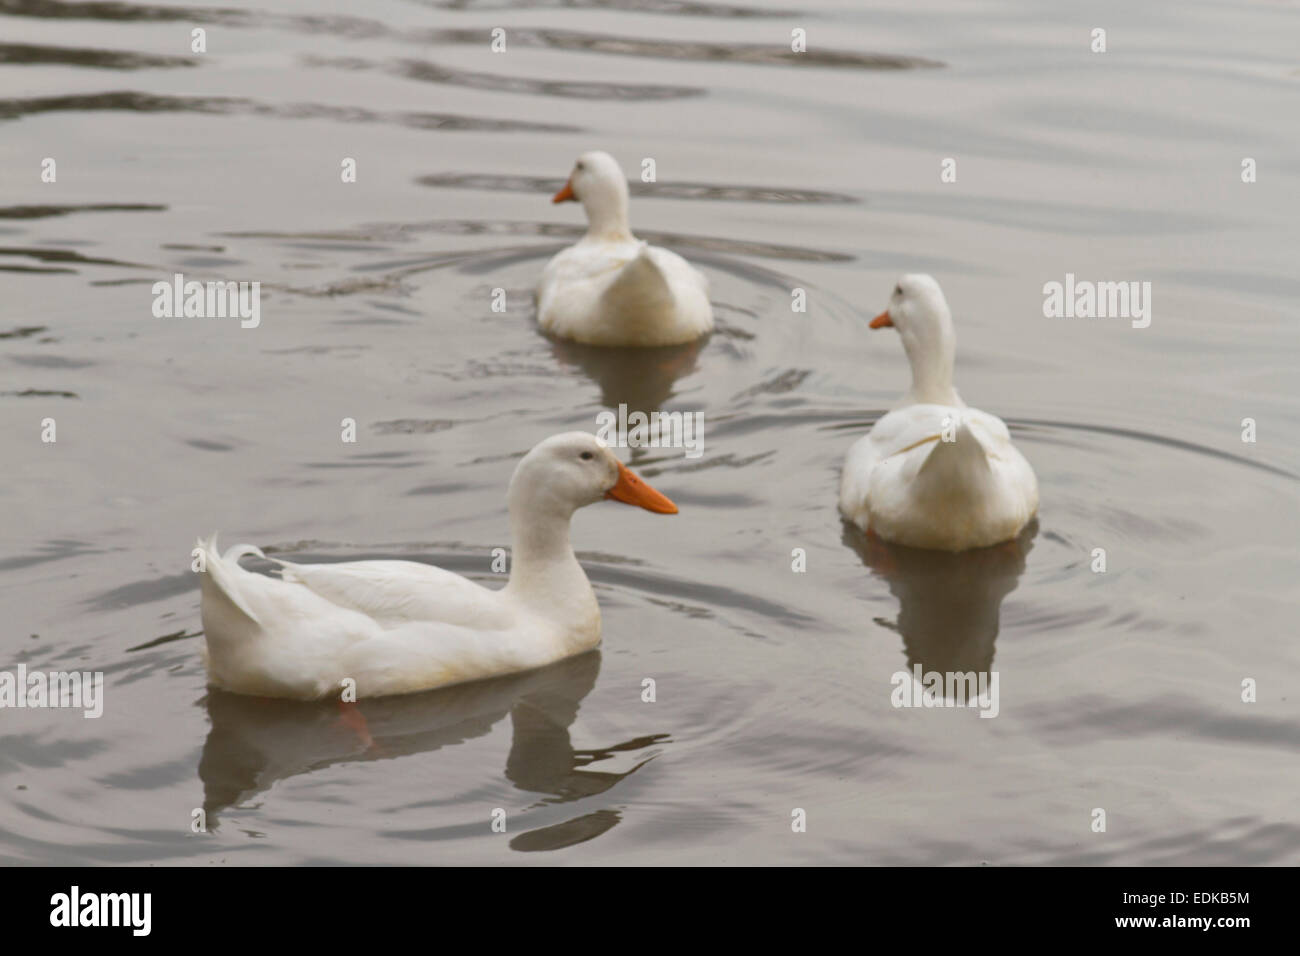 A white male duck swims behind two female ducks on a lake guarding them with a wary eye Stock Photo